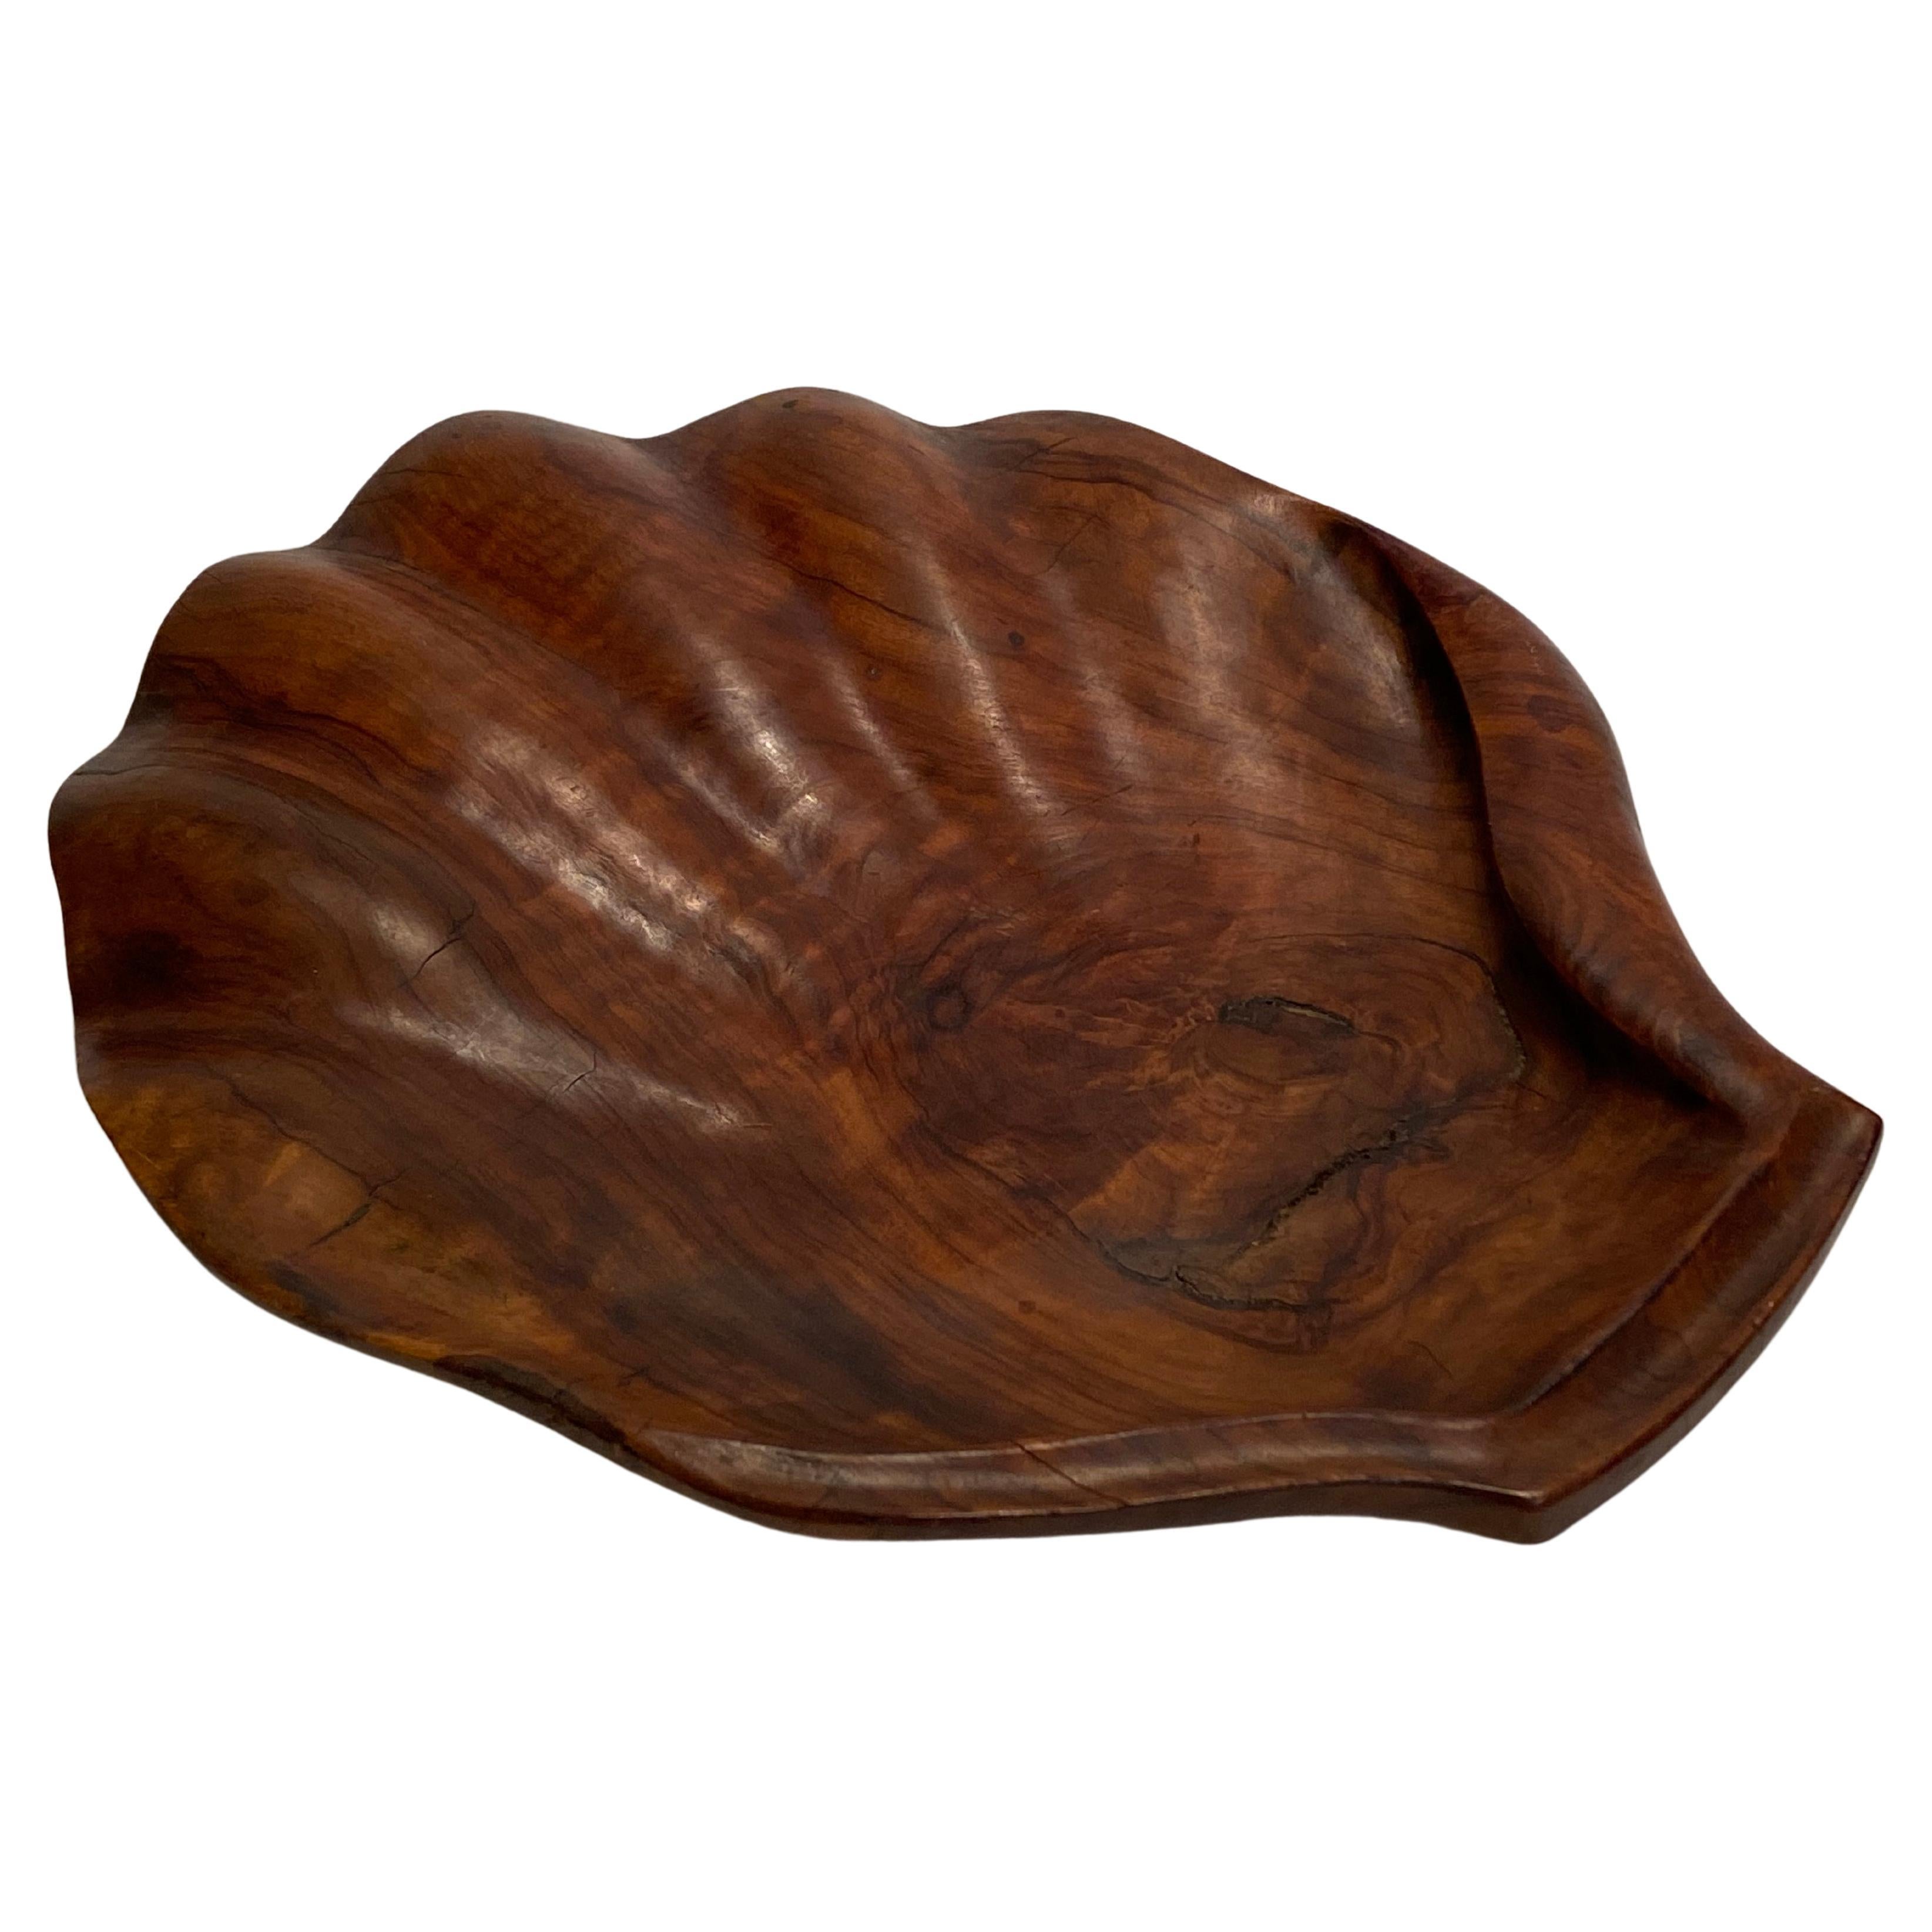 Dan Harner Scallop Shell Carved Wood Catch All